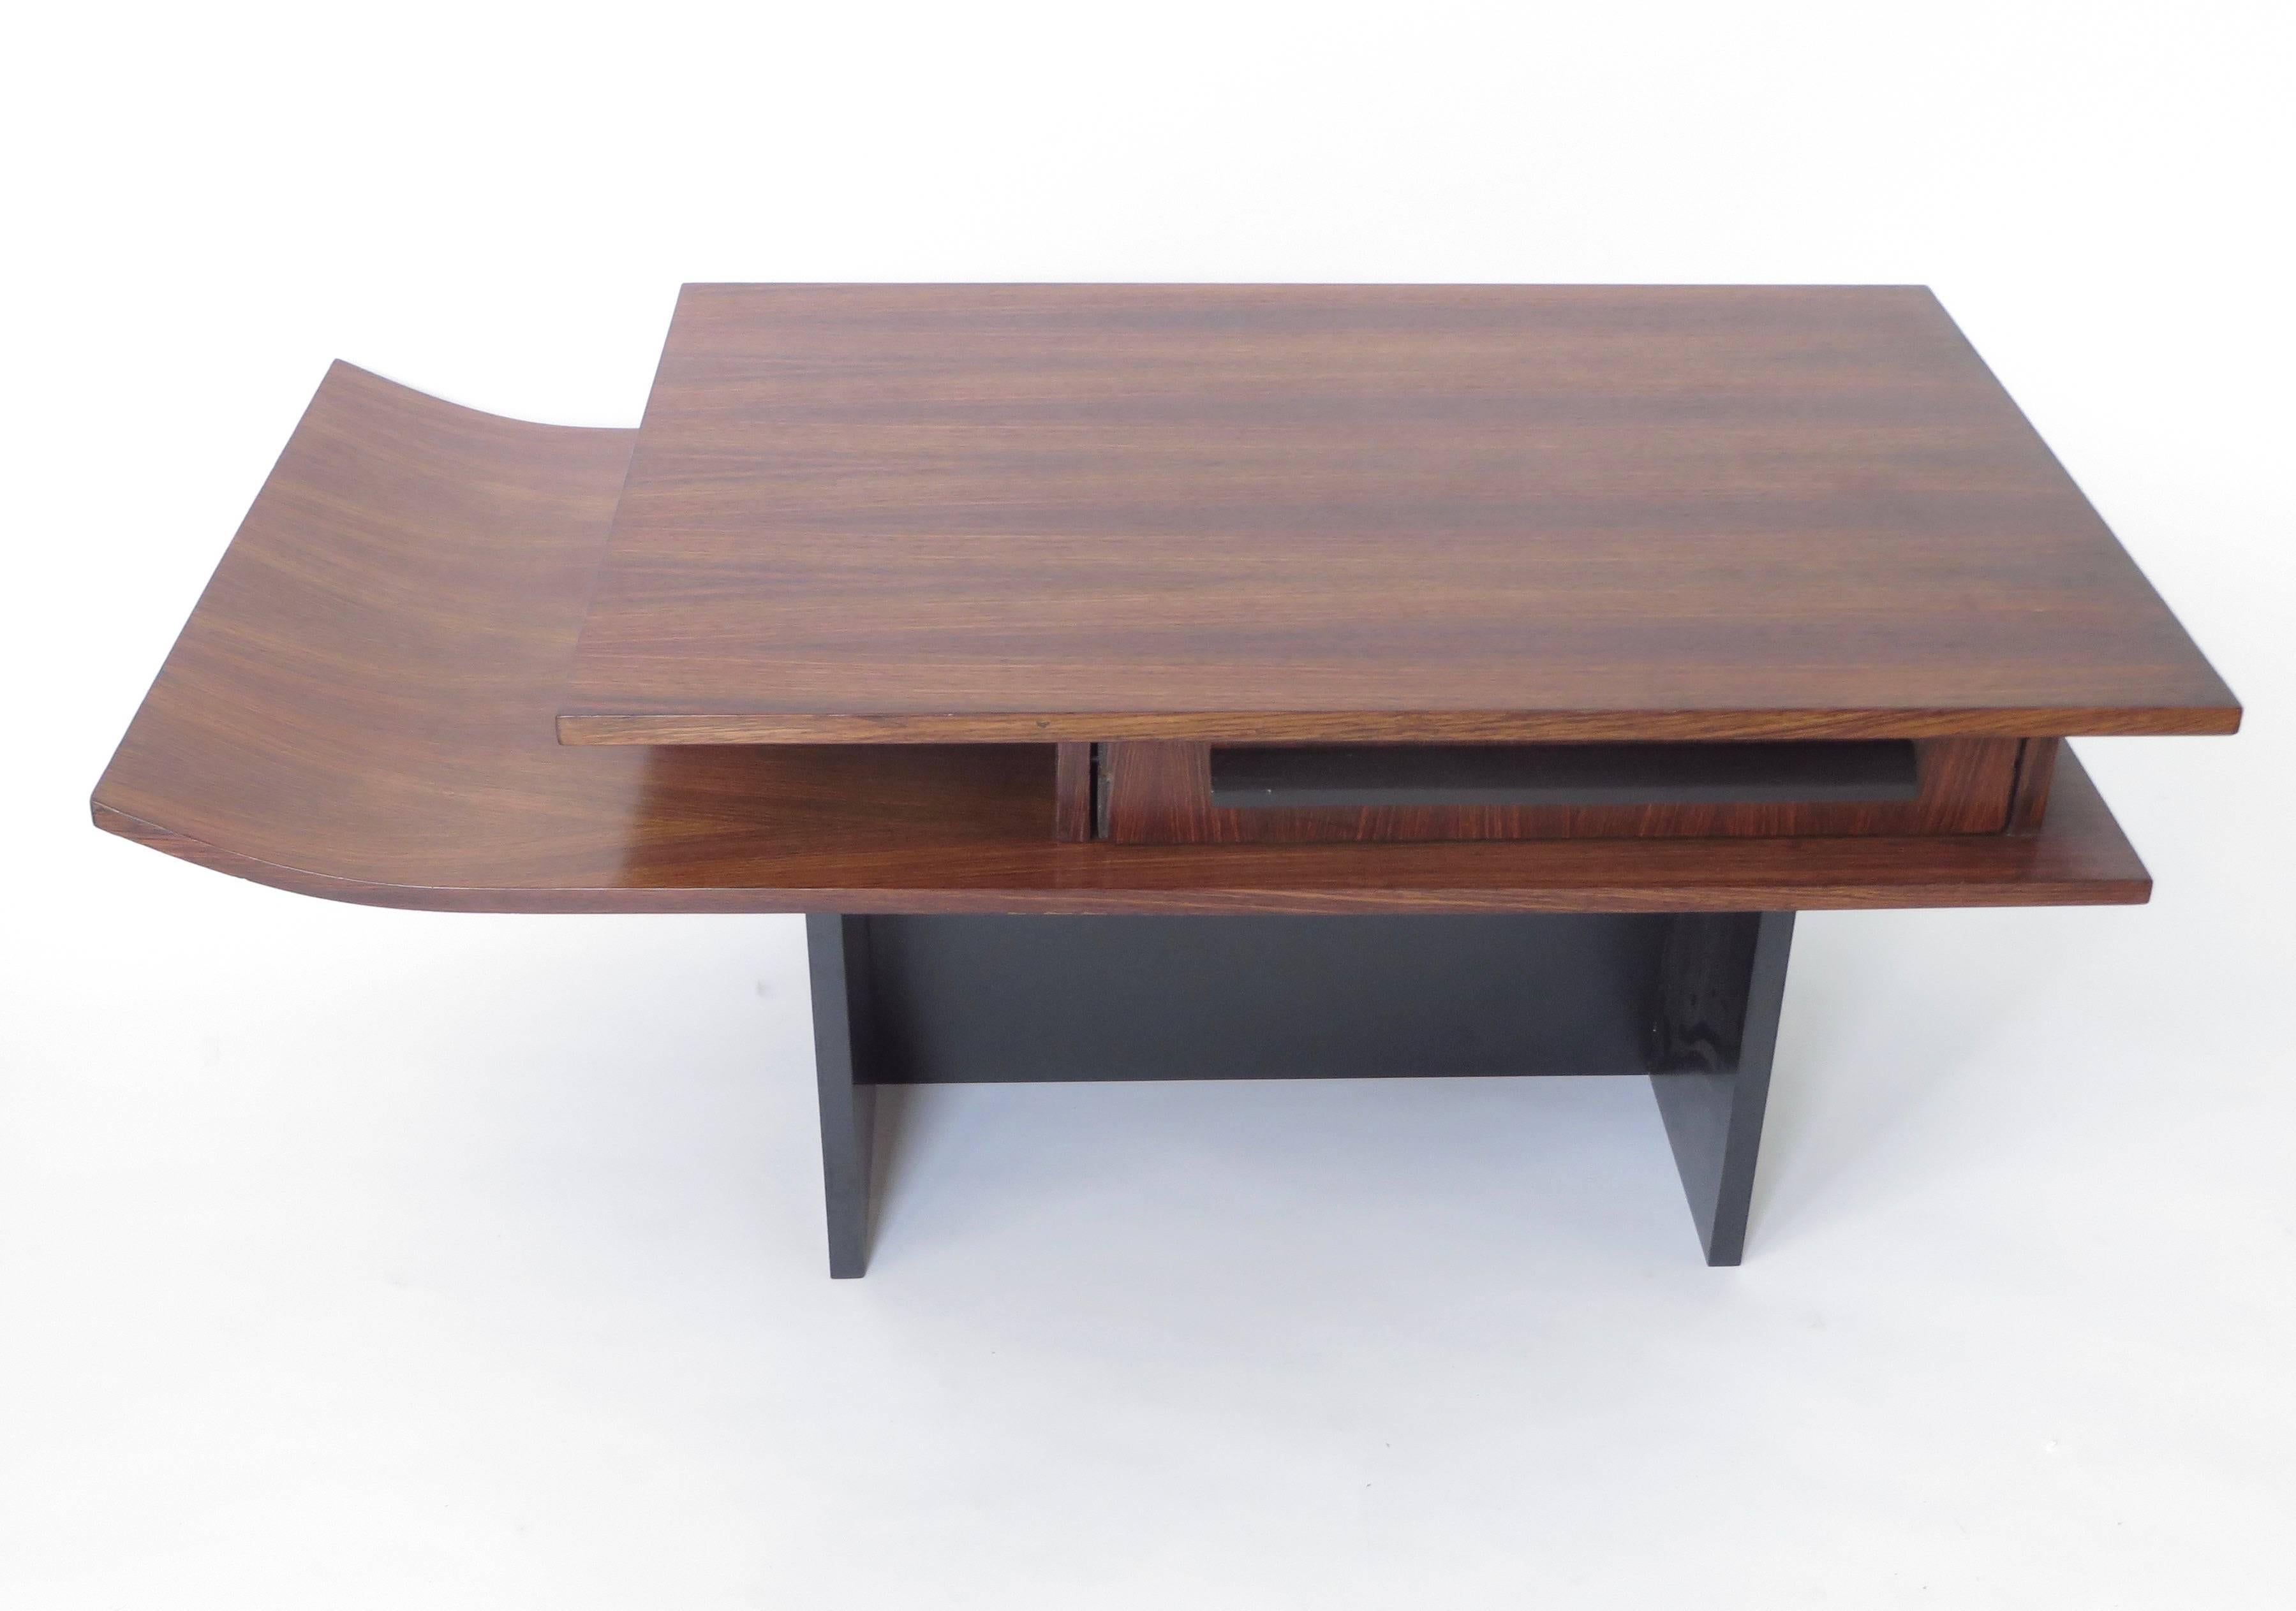 An coffee table of unknown designer made of two levels of rosewood, one level with a gently sloping upward curve. One drawer with ebonized rosewood drawer pull sitting on black laminate base. 
A unique feature of the drawer is that it slides through